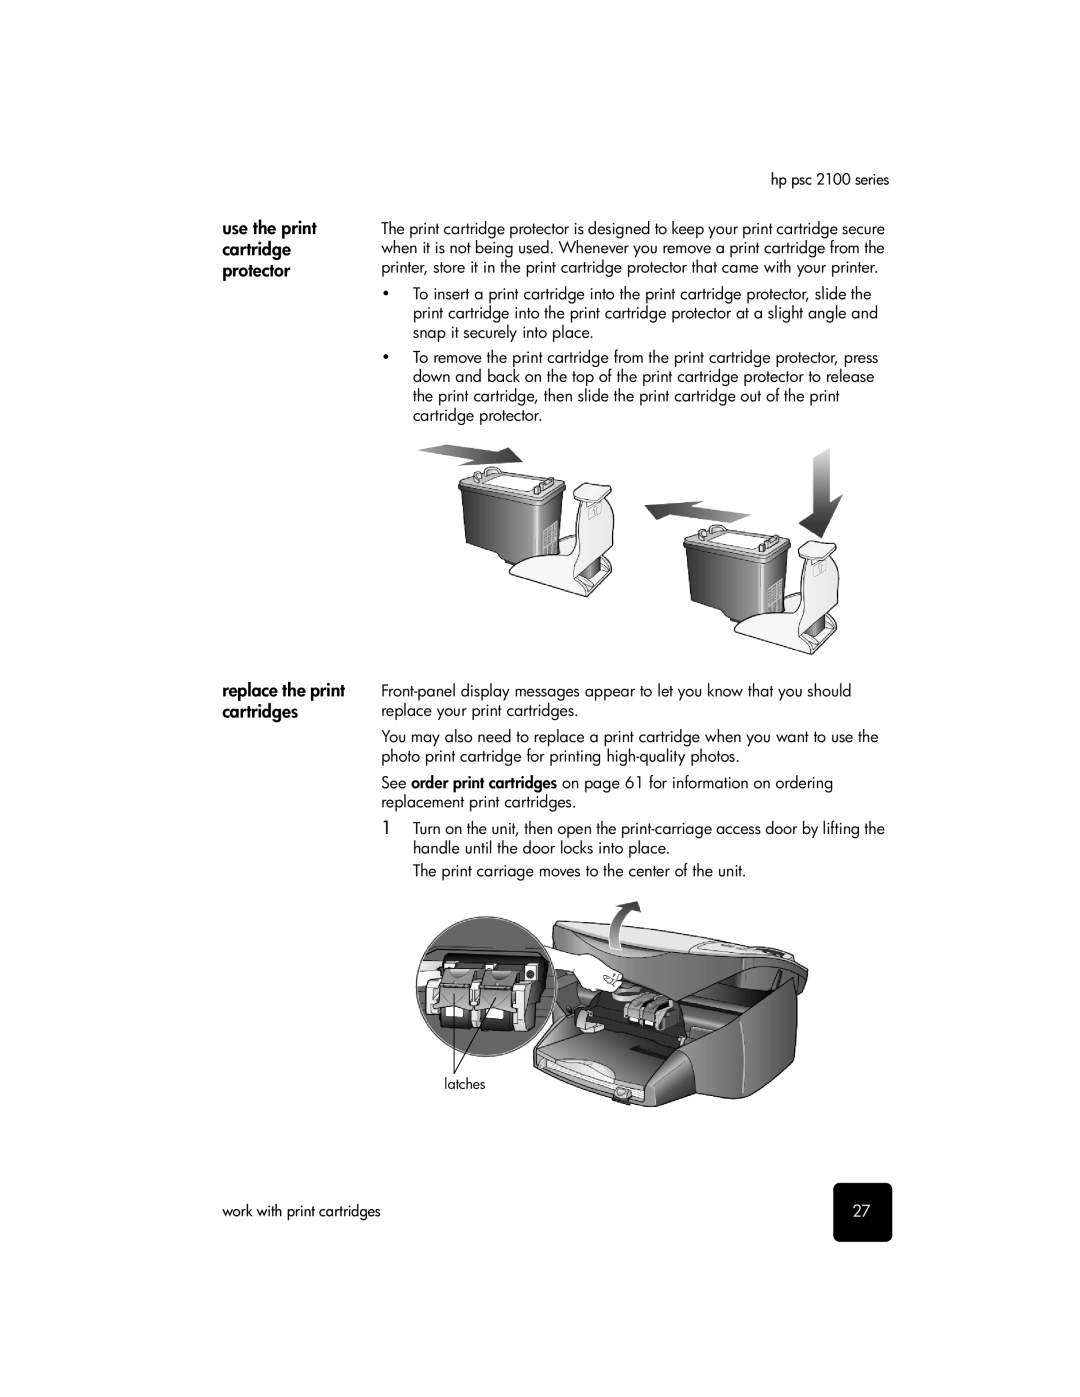 HP 2100 manual Latches Work with print cartridges 